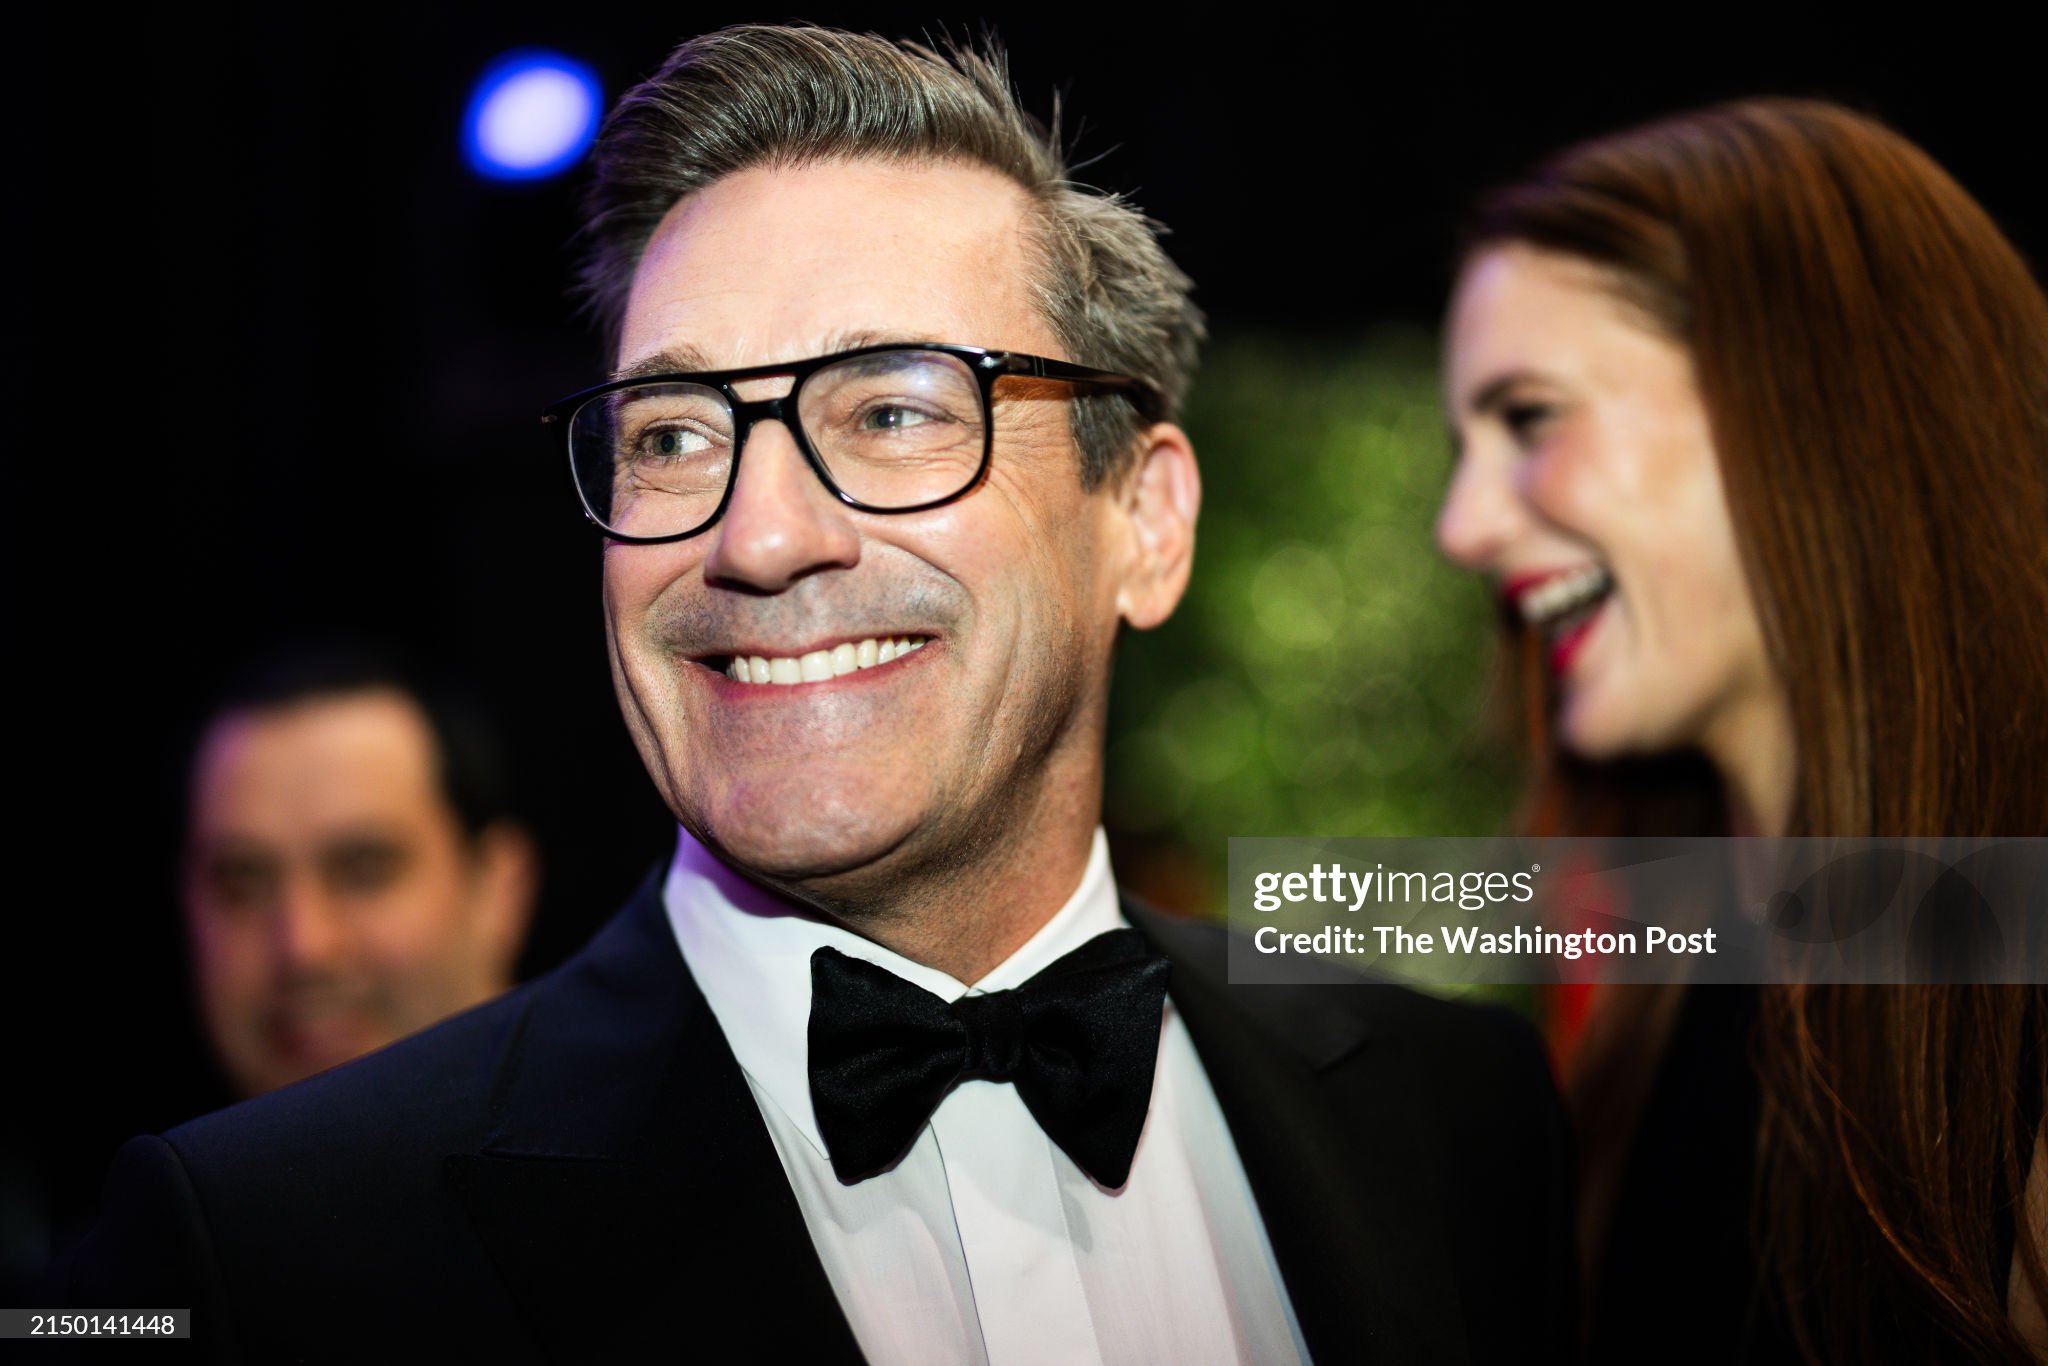 gettyimages-2150141448-2048x2048.jpg